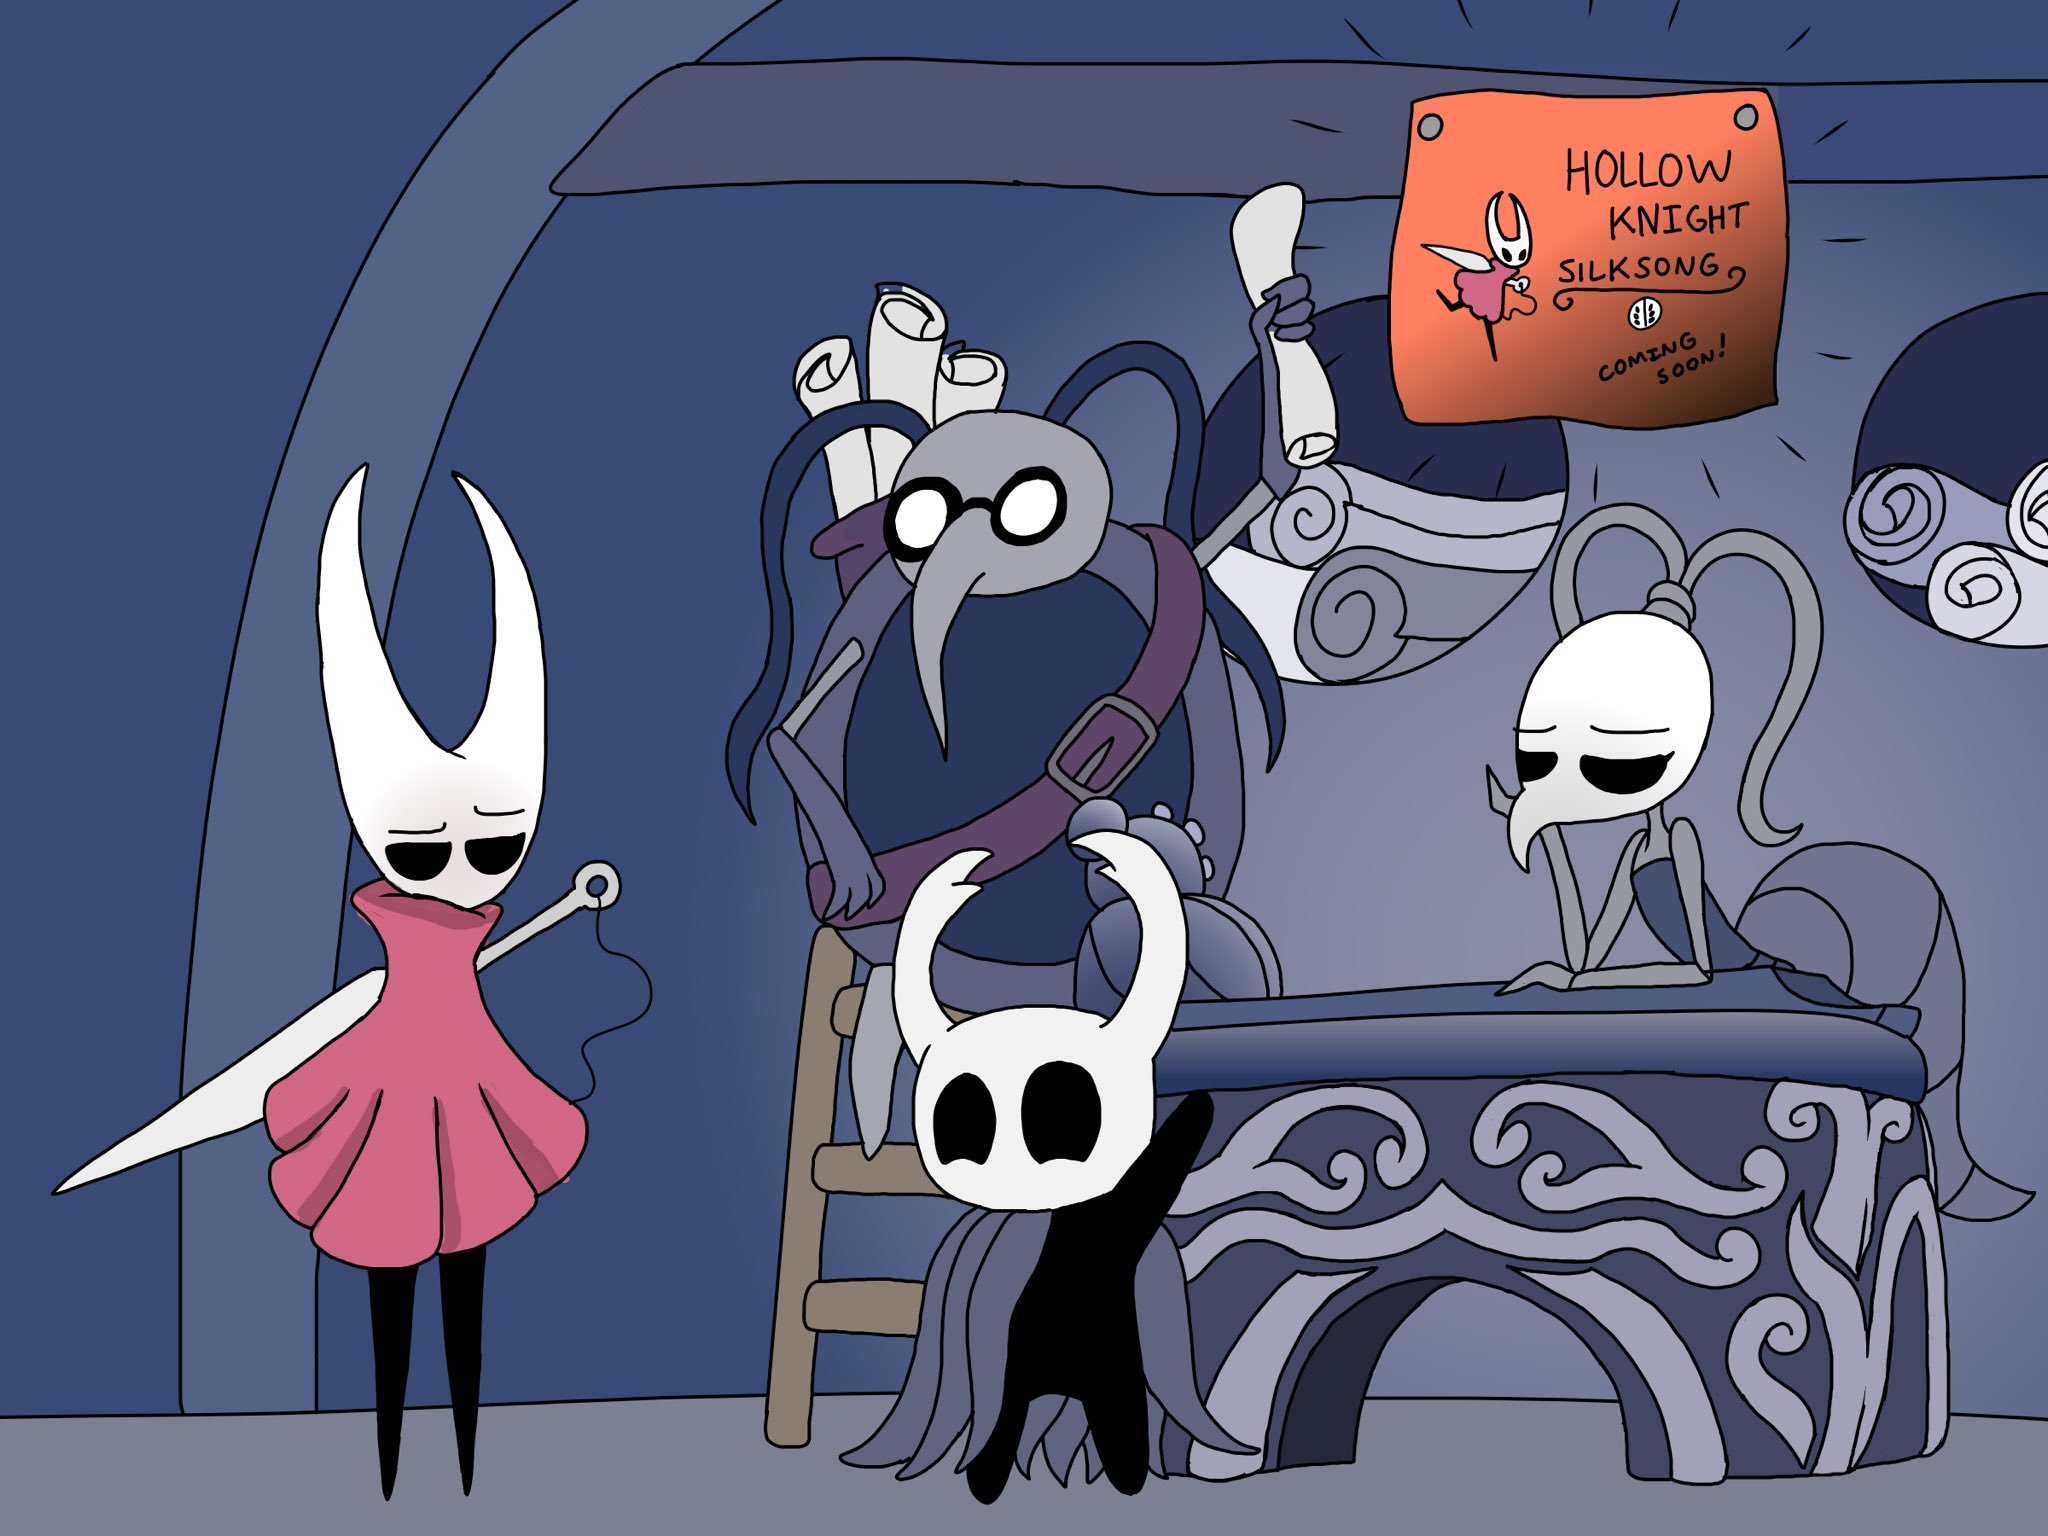 Anyone else hyped for Silksong?! #hollowknight #HollowKnightSilksong https:...